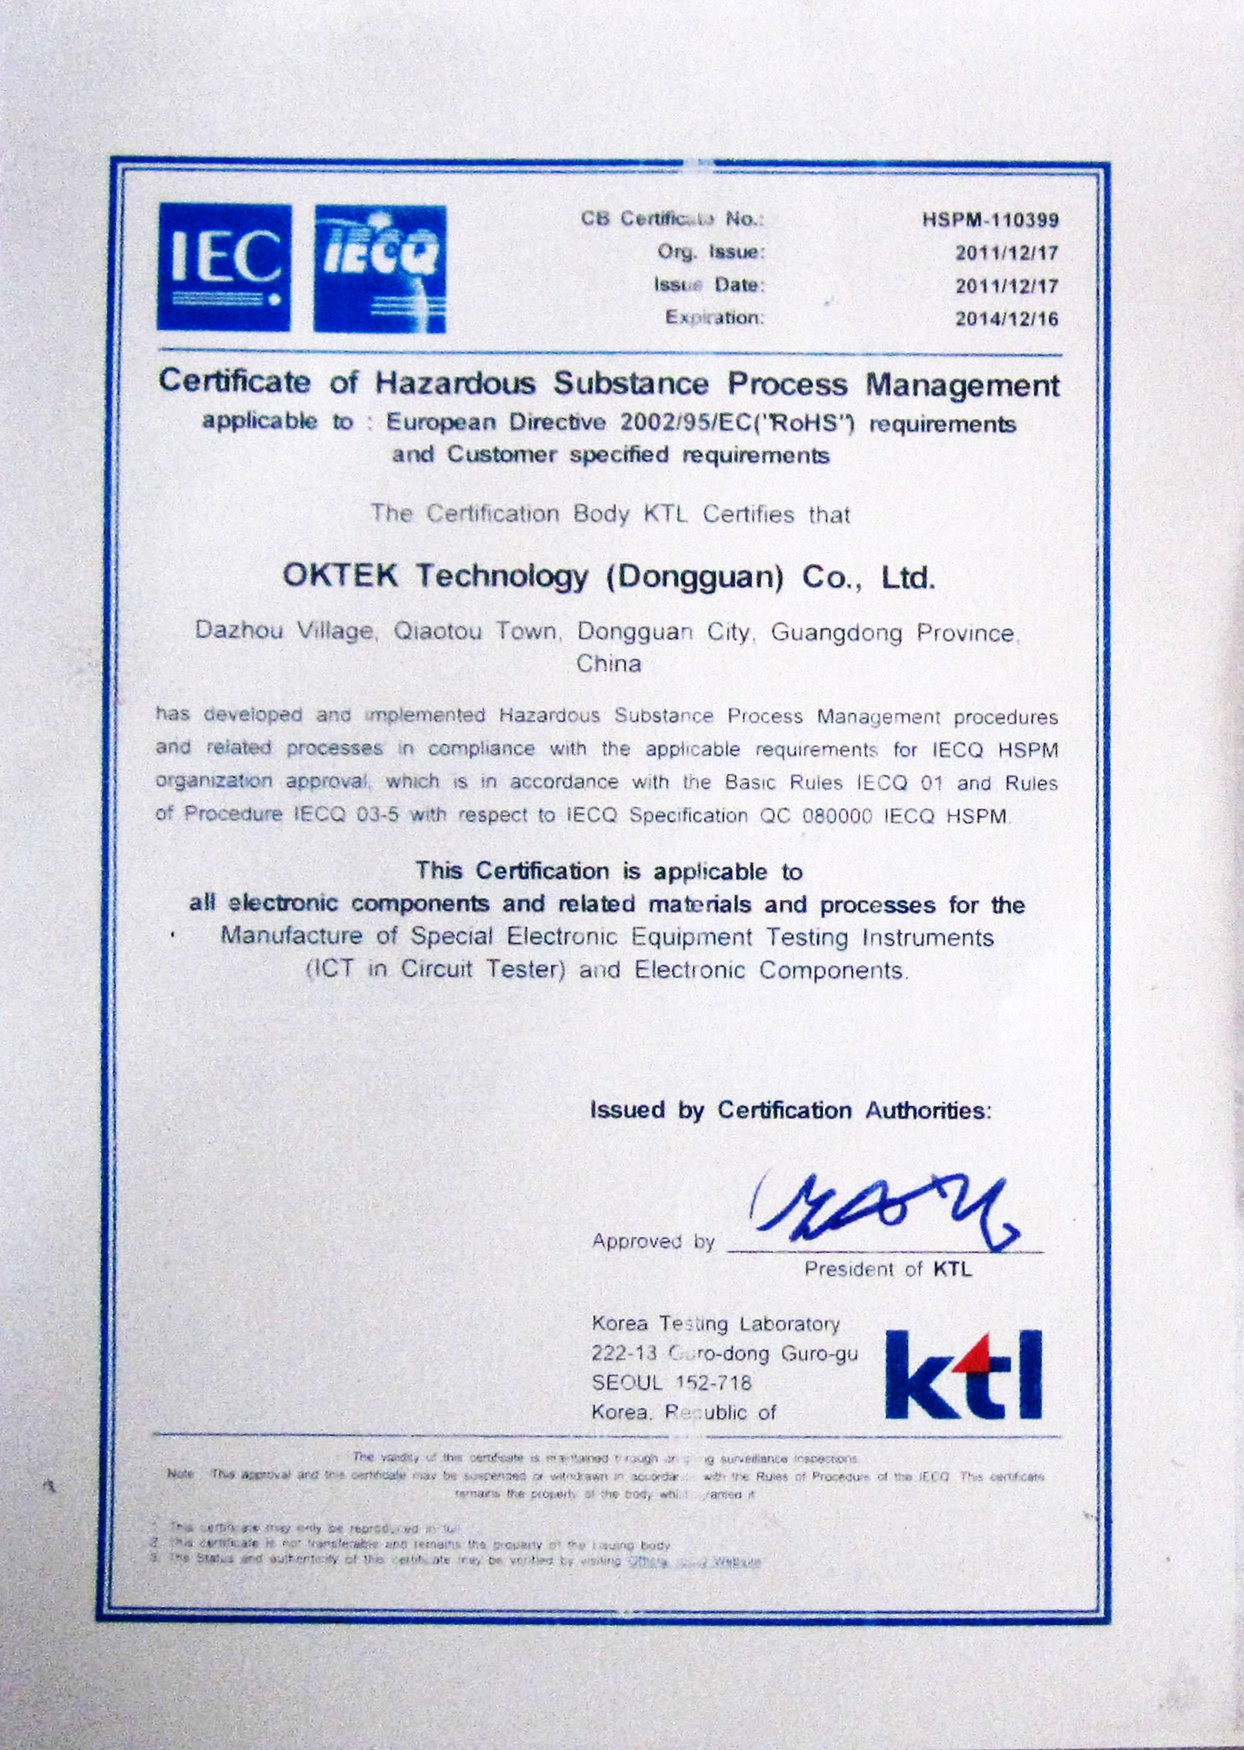 This is certificate of QC 08000 English language for OKTEK smt pcba second manufacturer